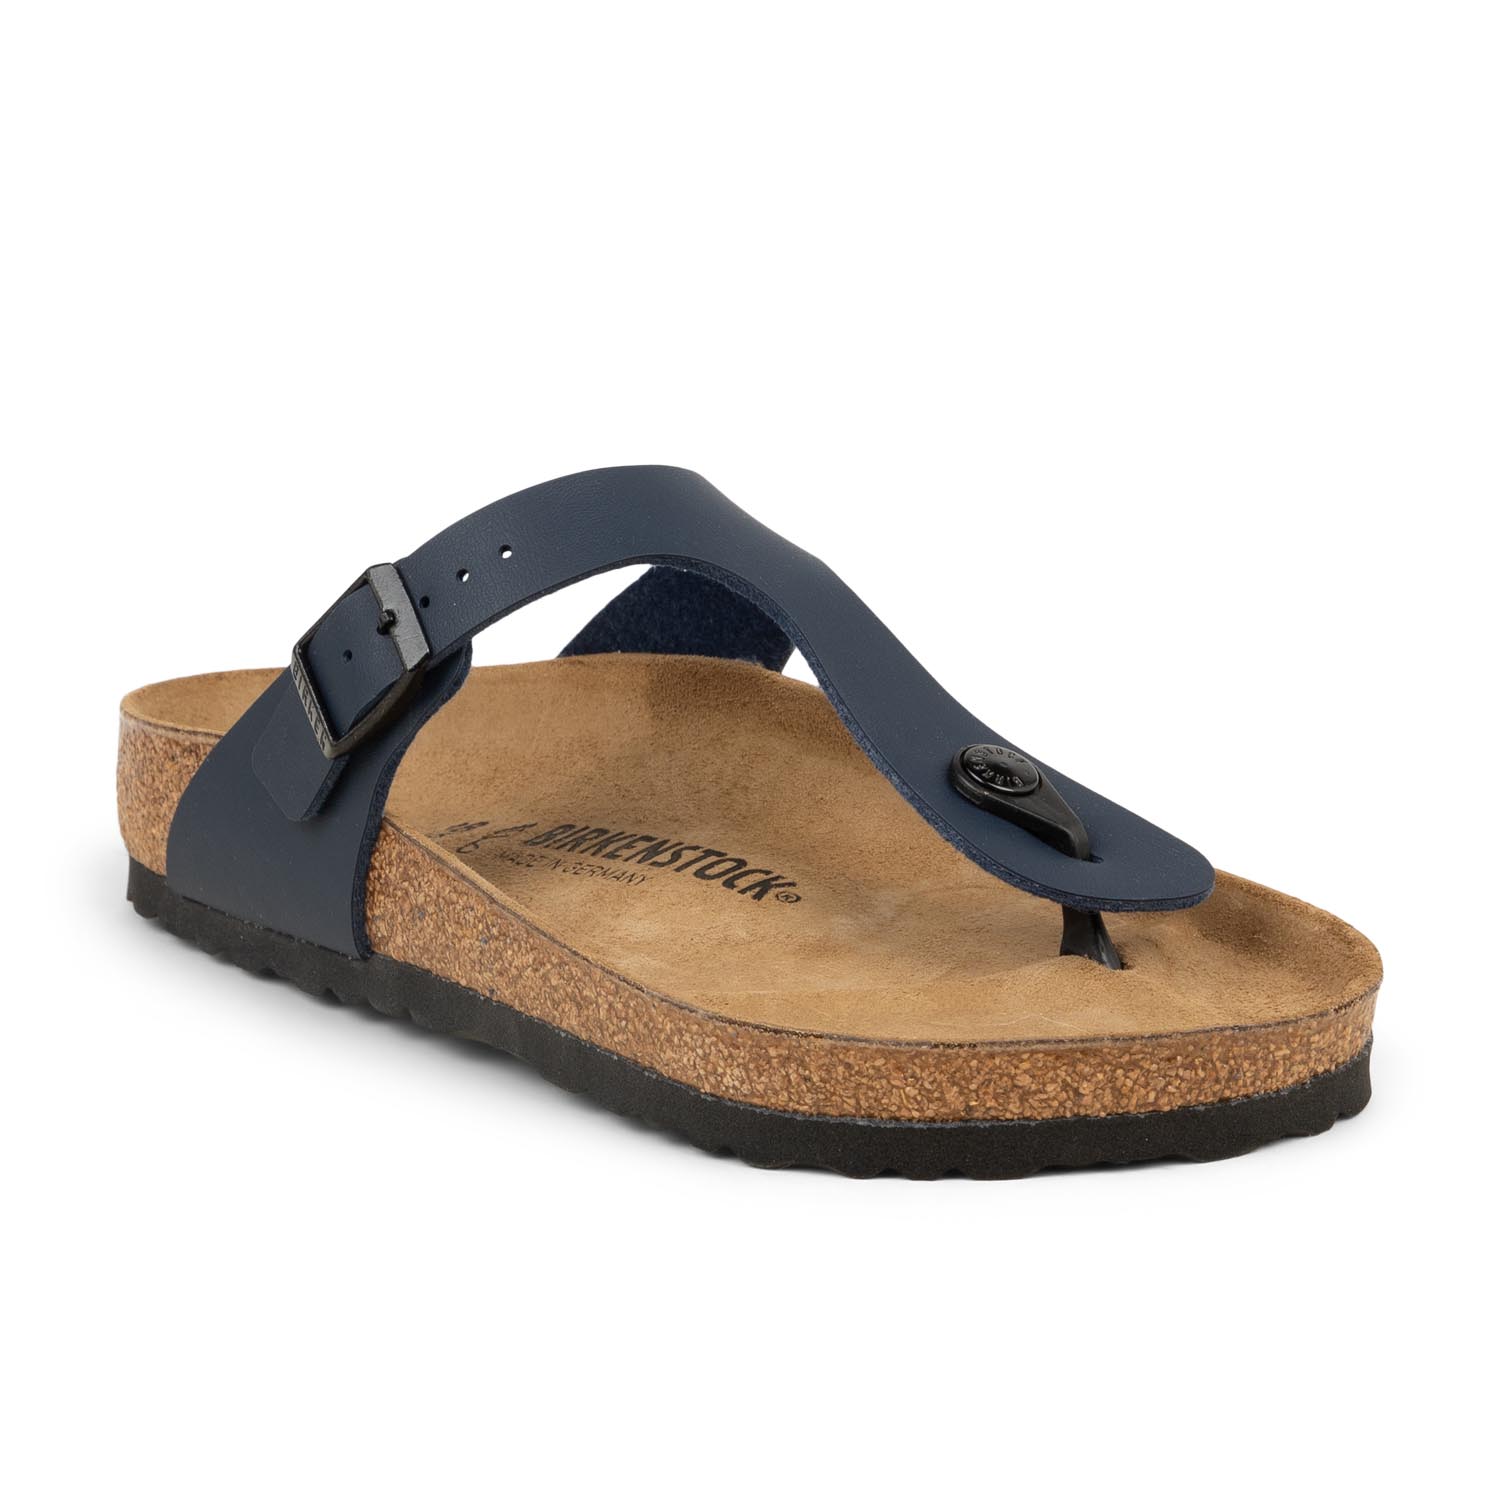 02 - GIZEH - BIRKENSTOCK -  - Cuir / synthétique